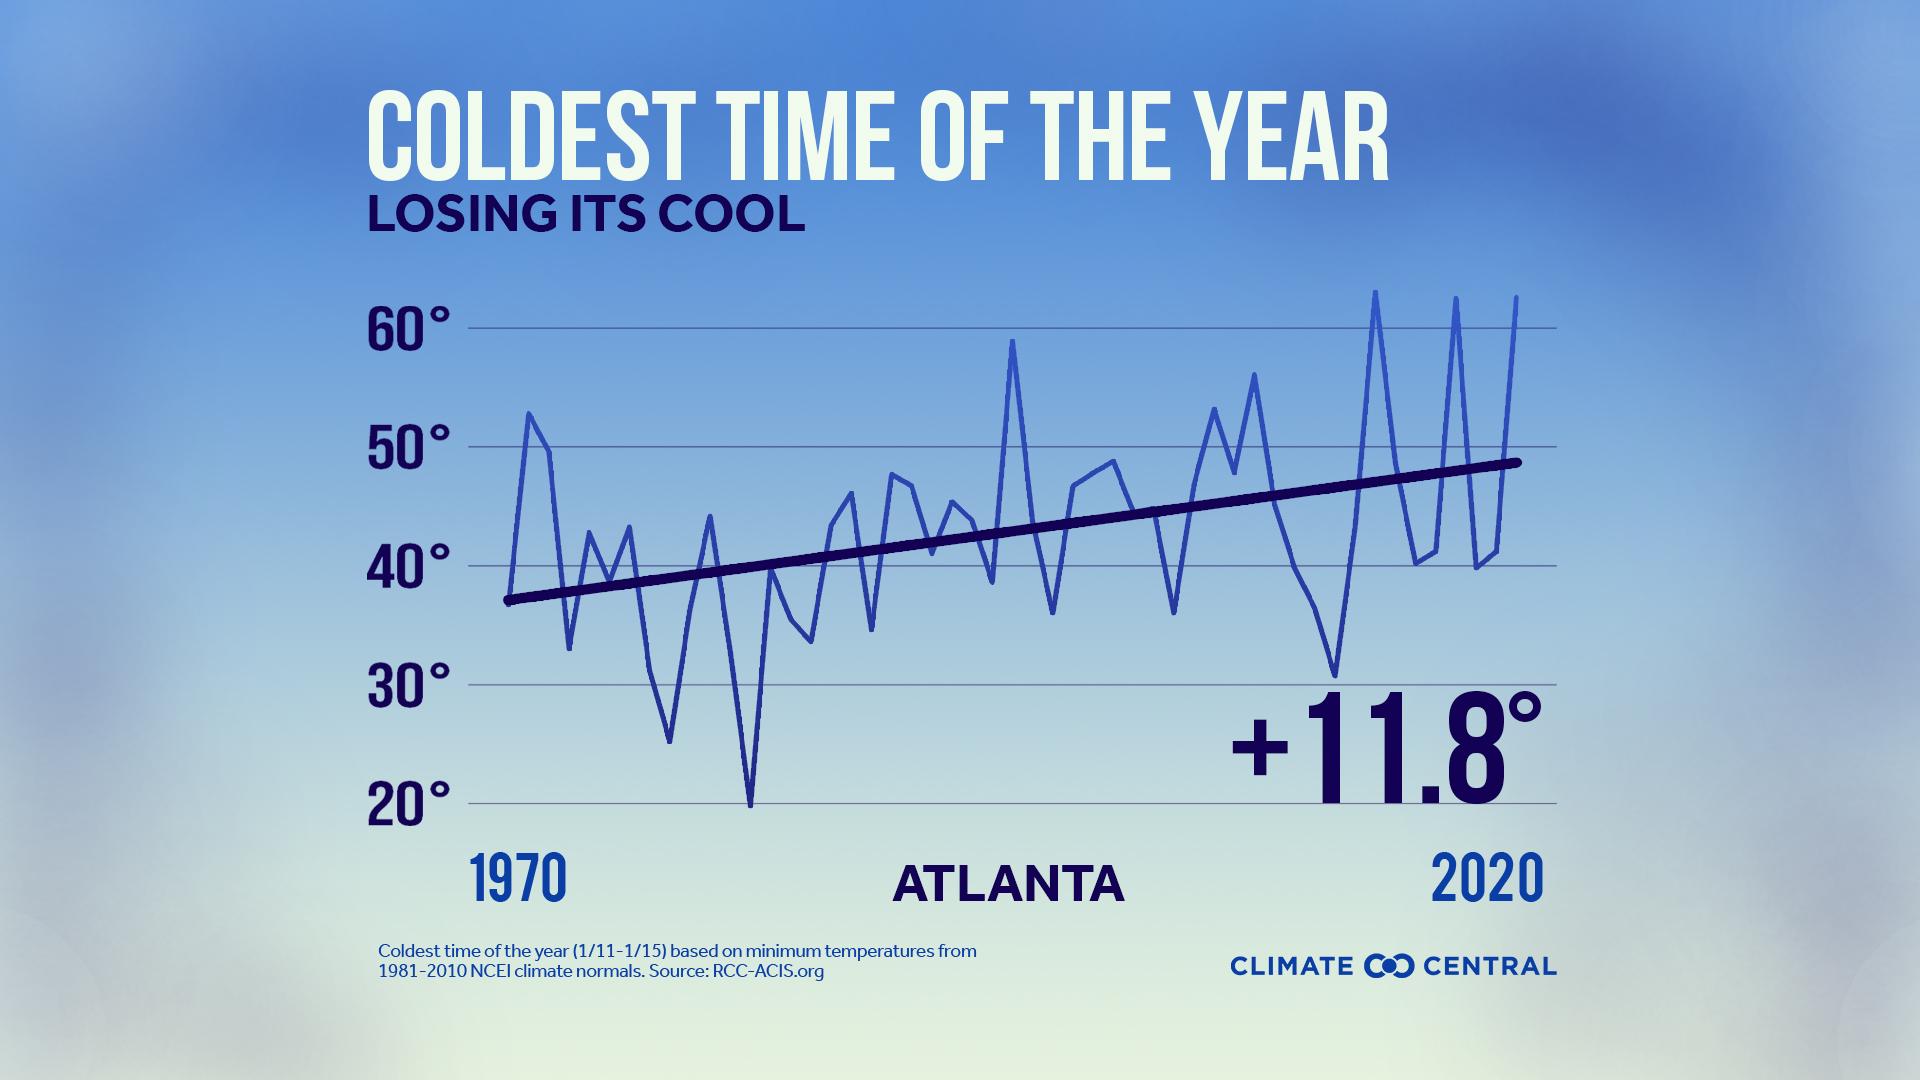 Average Temperature during the Coldest Time Year - Winter's Coldest Time